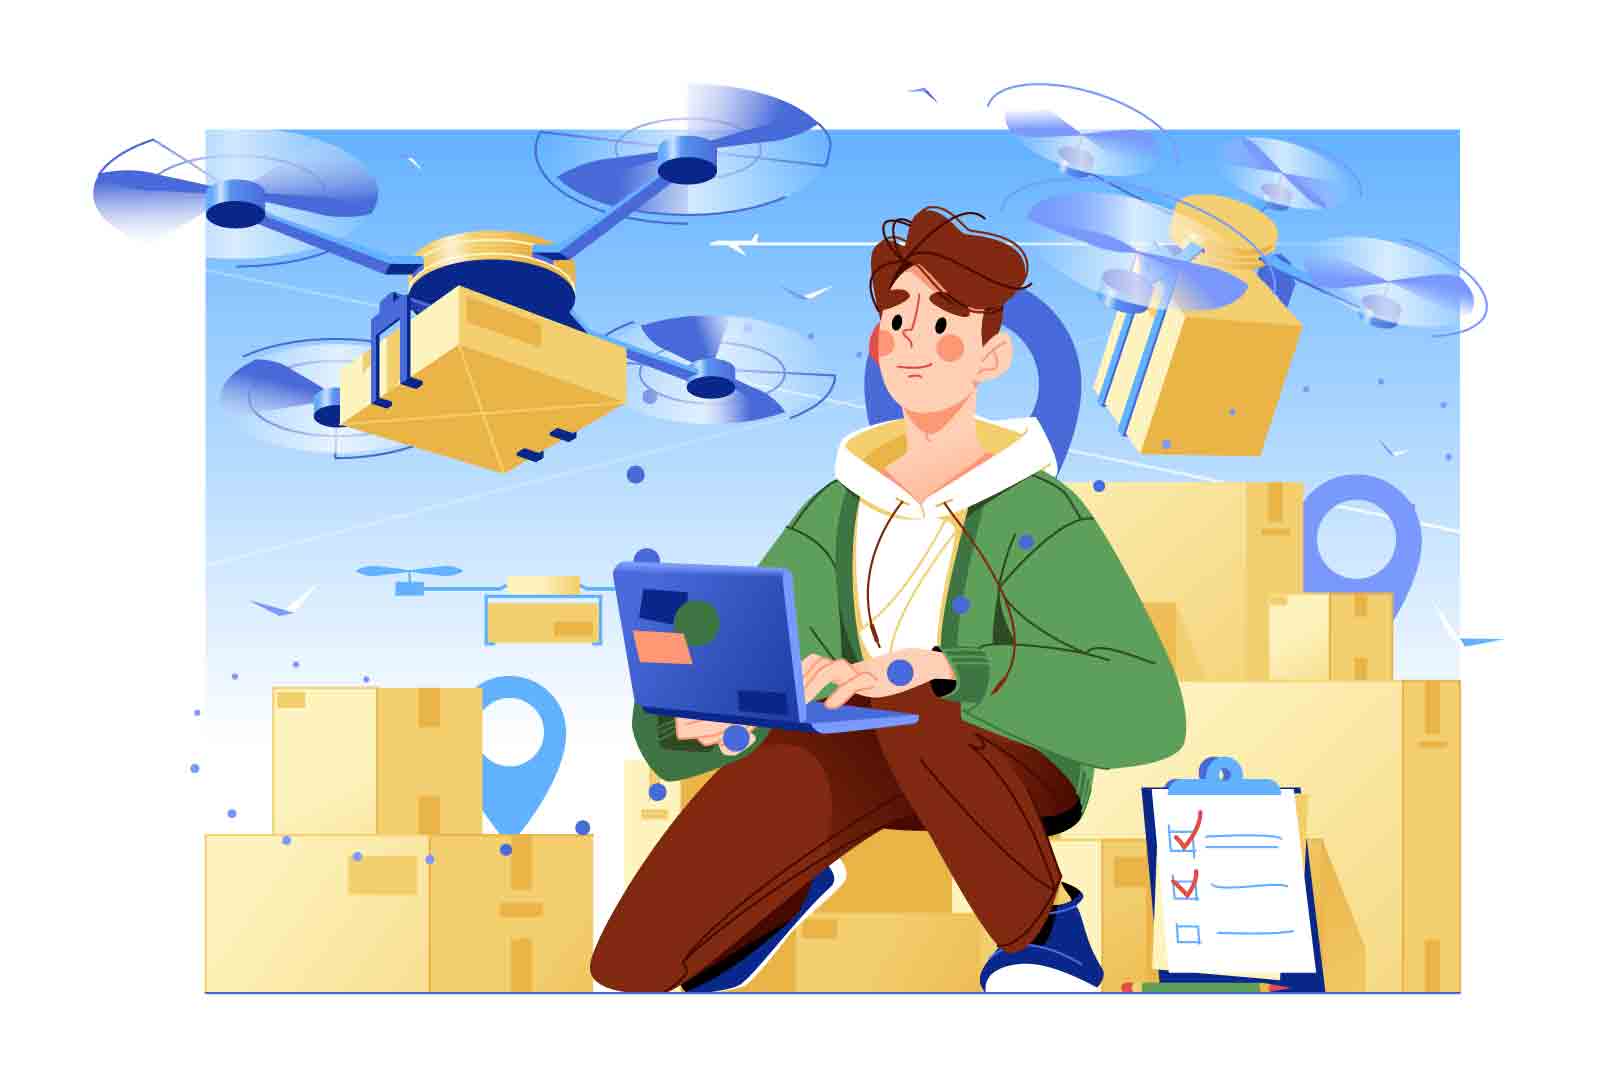 E-commerce modern fast drone delivery concept. Man controls flying delivery drone from laptop, vector illustration.